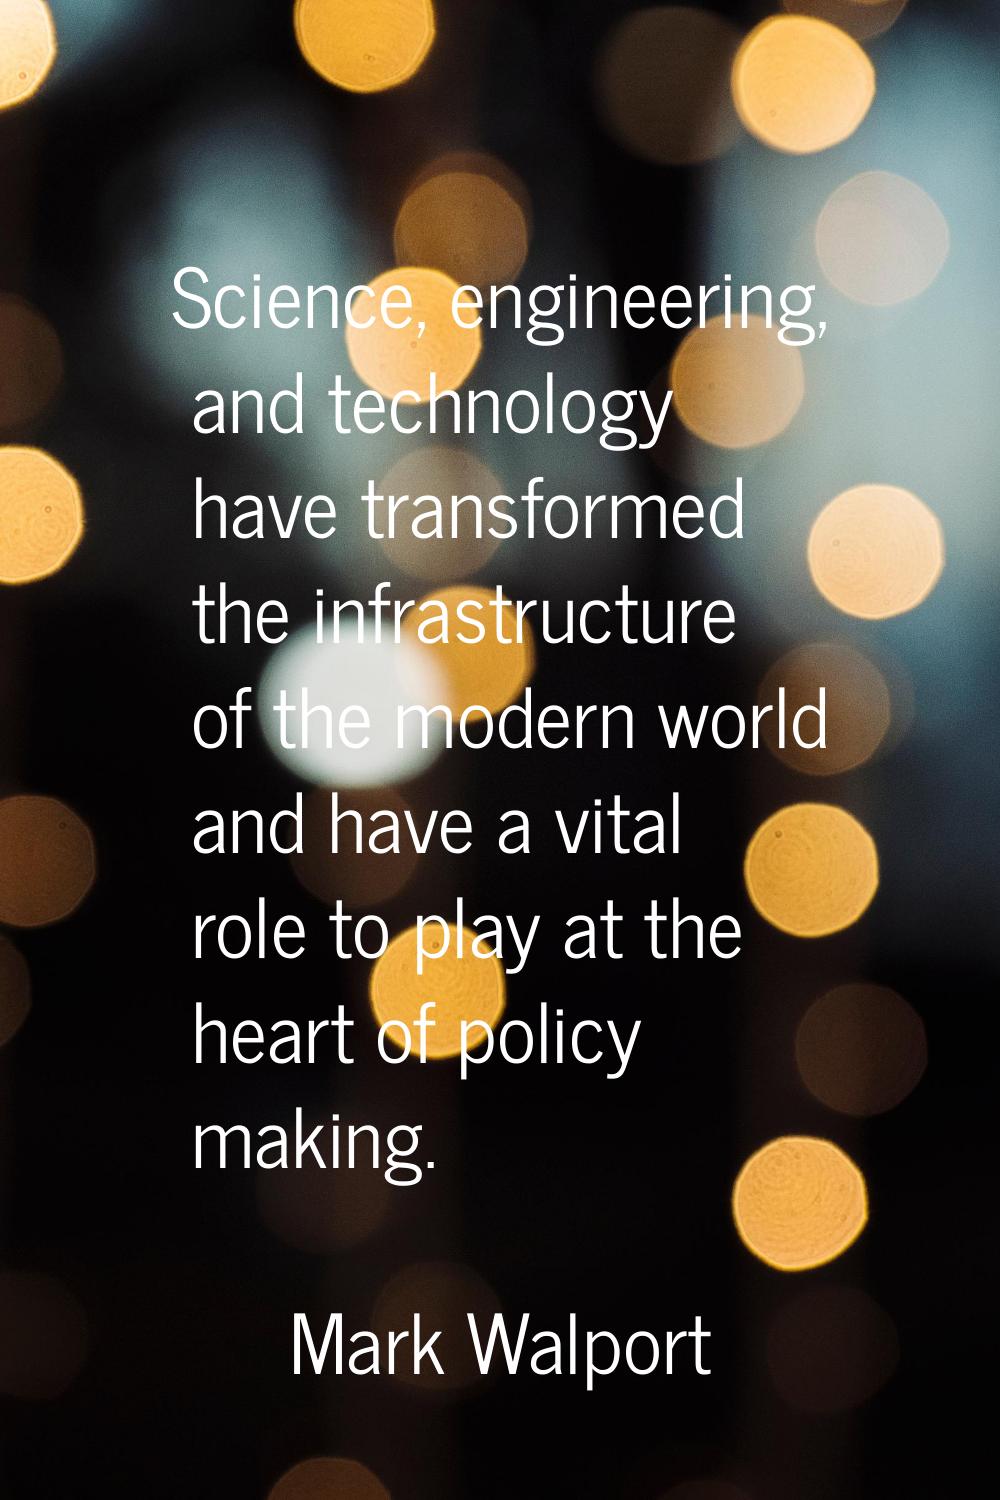 Science, engineering, and technology have transformed the infrastructure of the modern world and ha